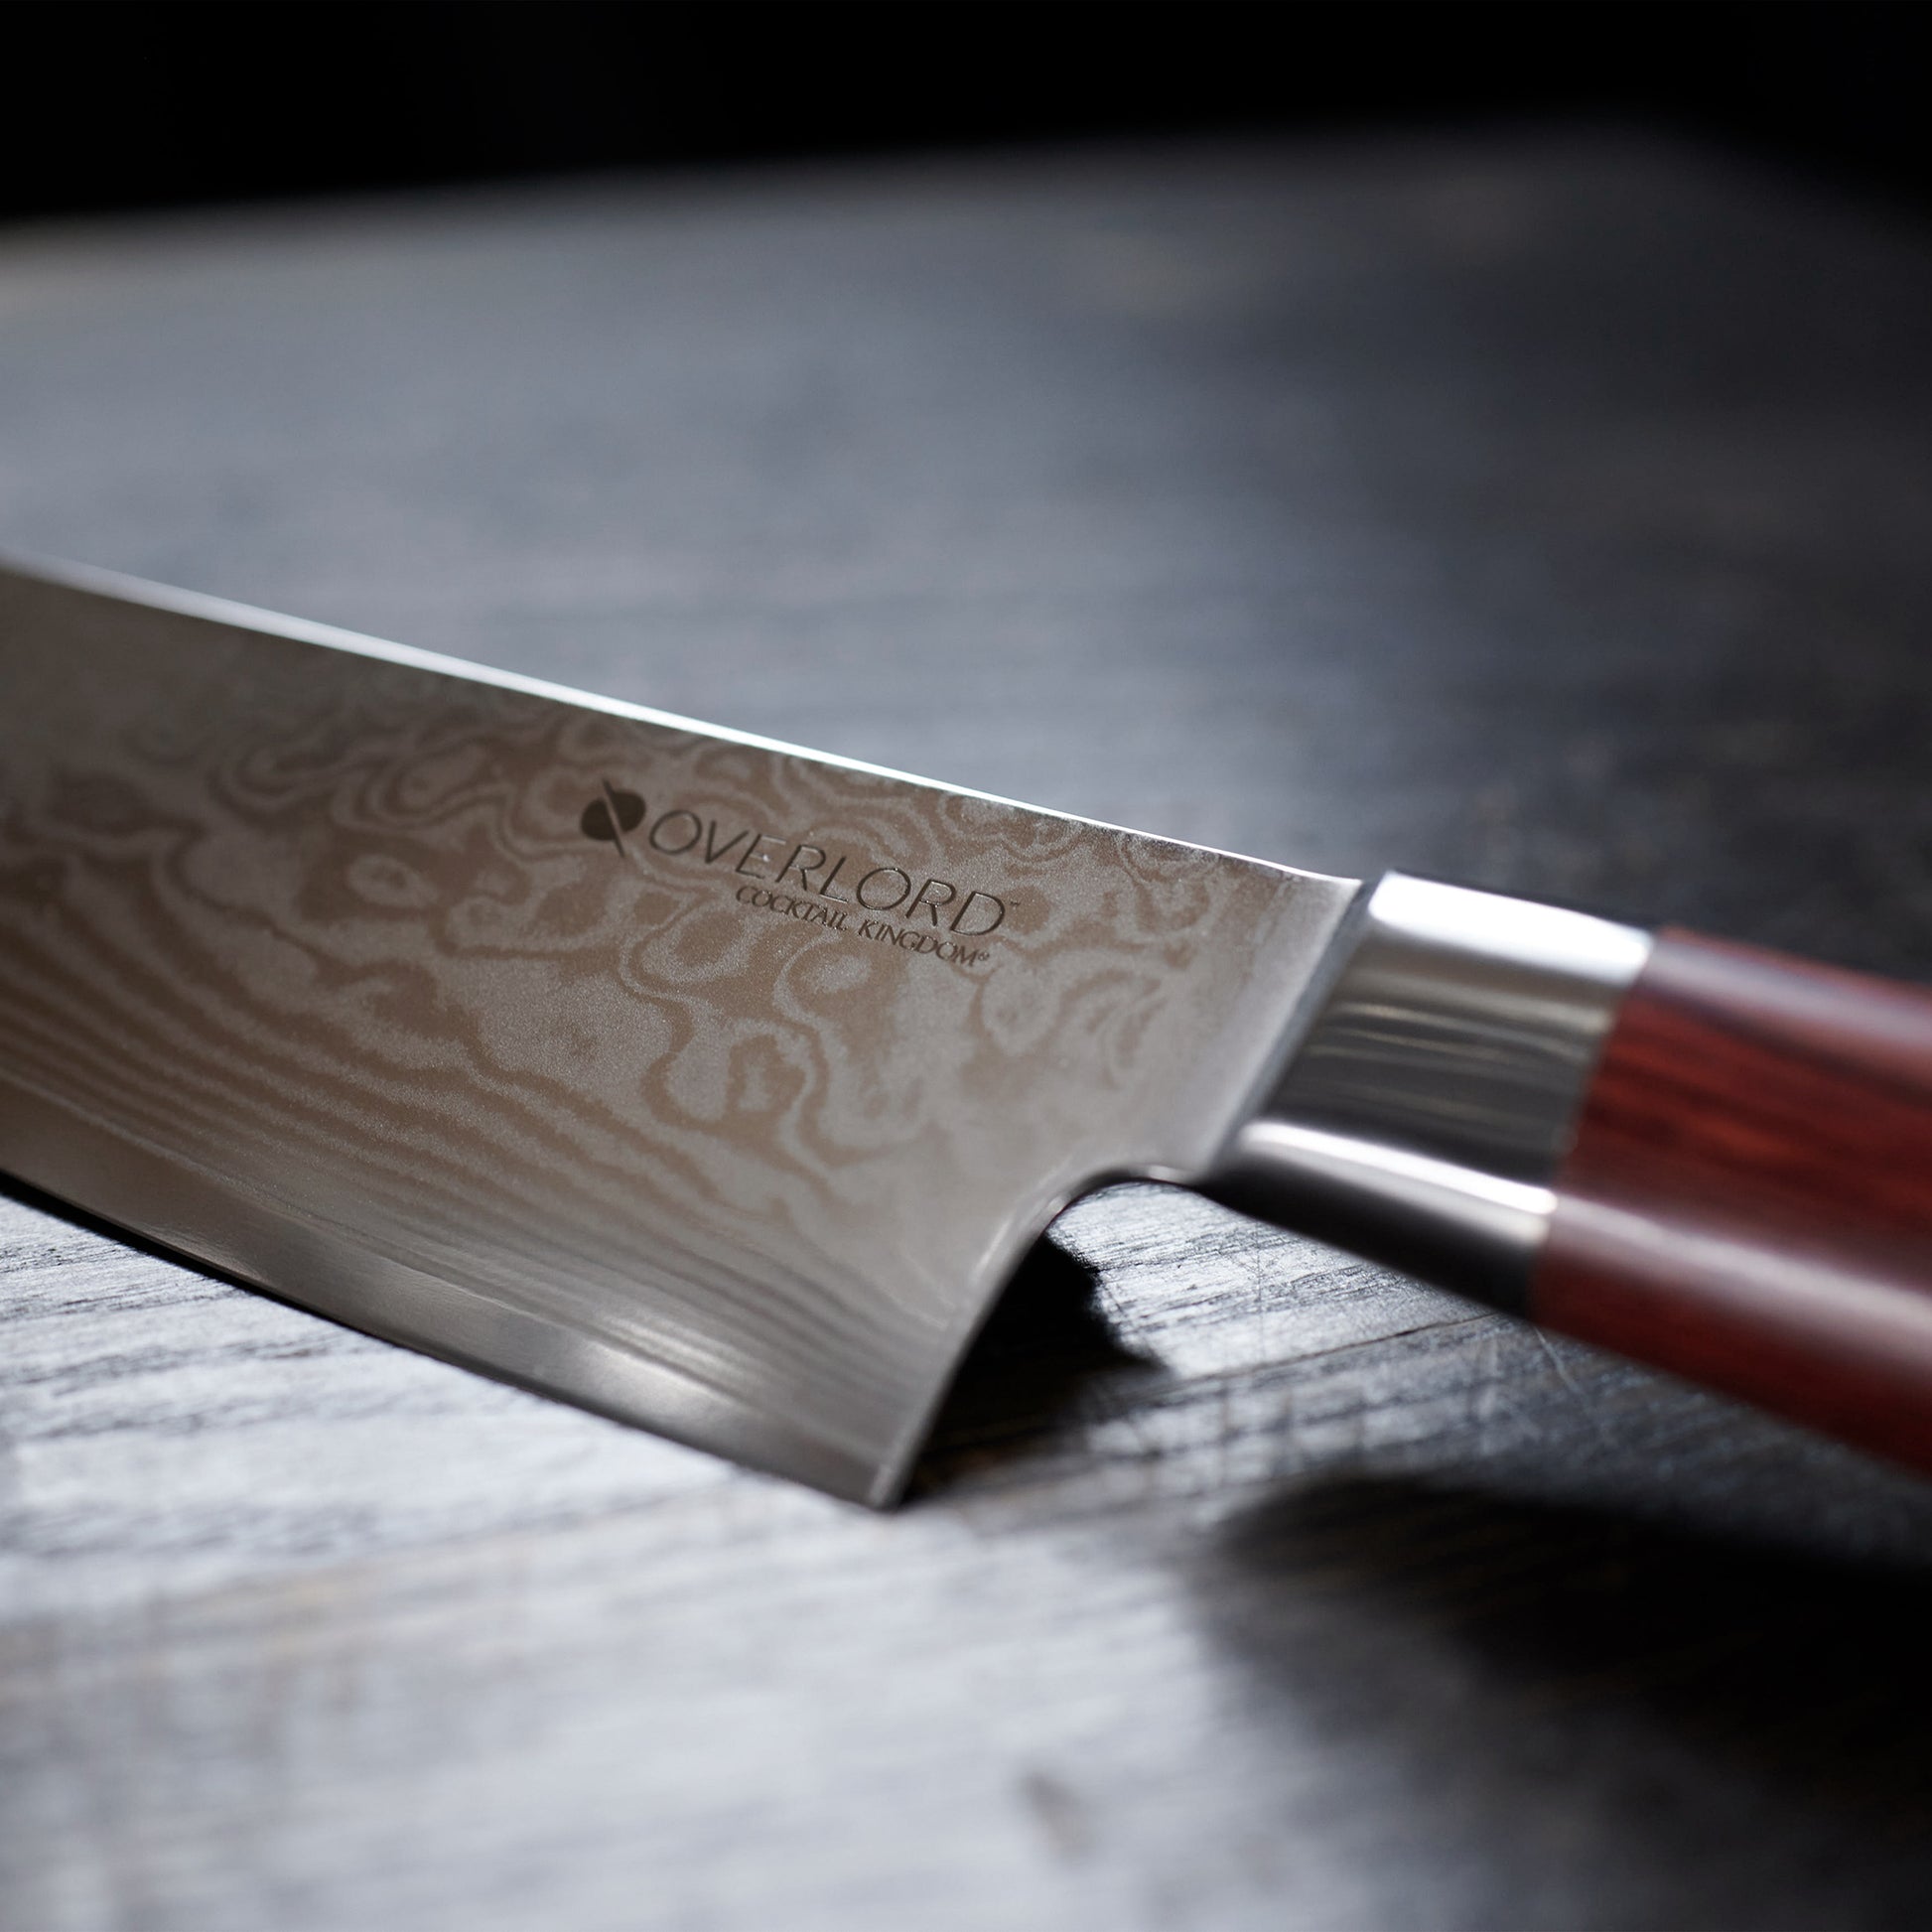 Yaxell Super Gou Chef's Knife - 8